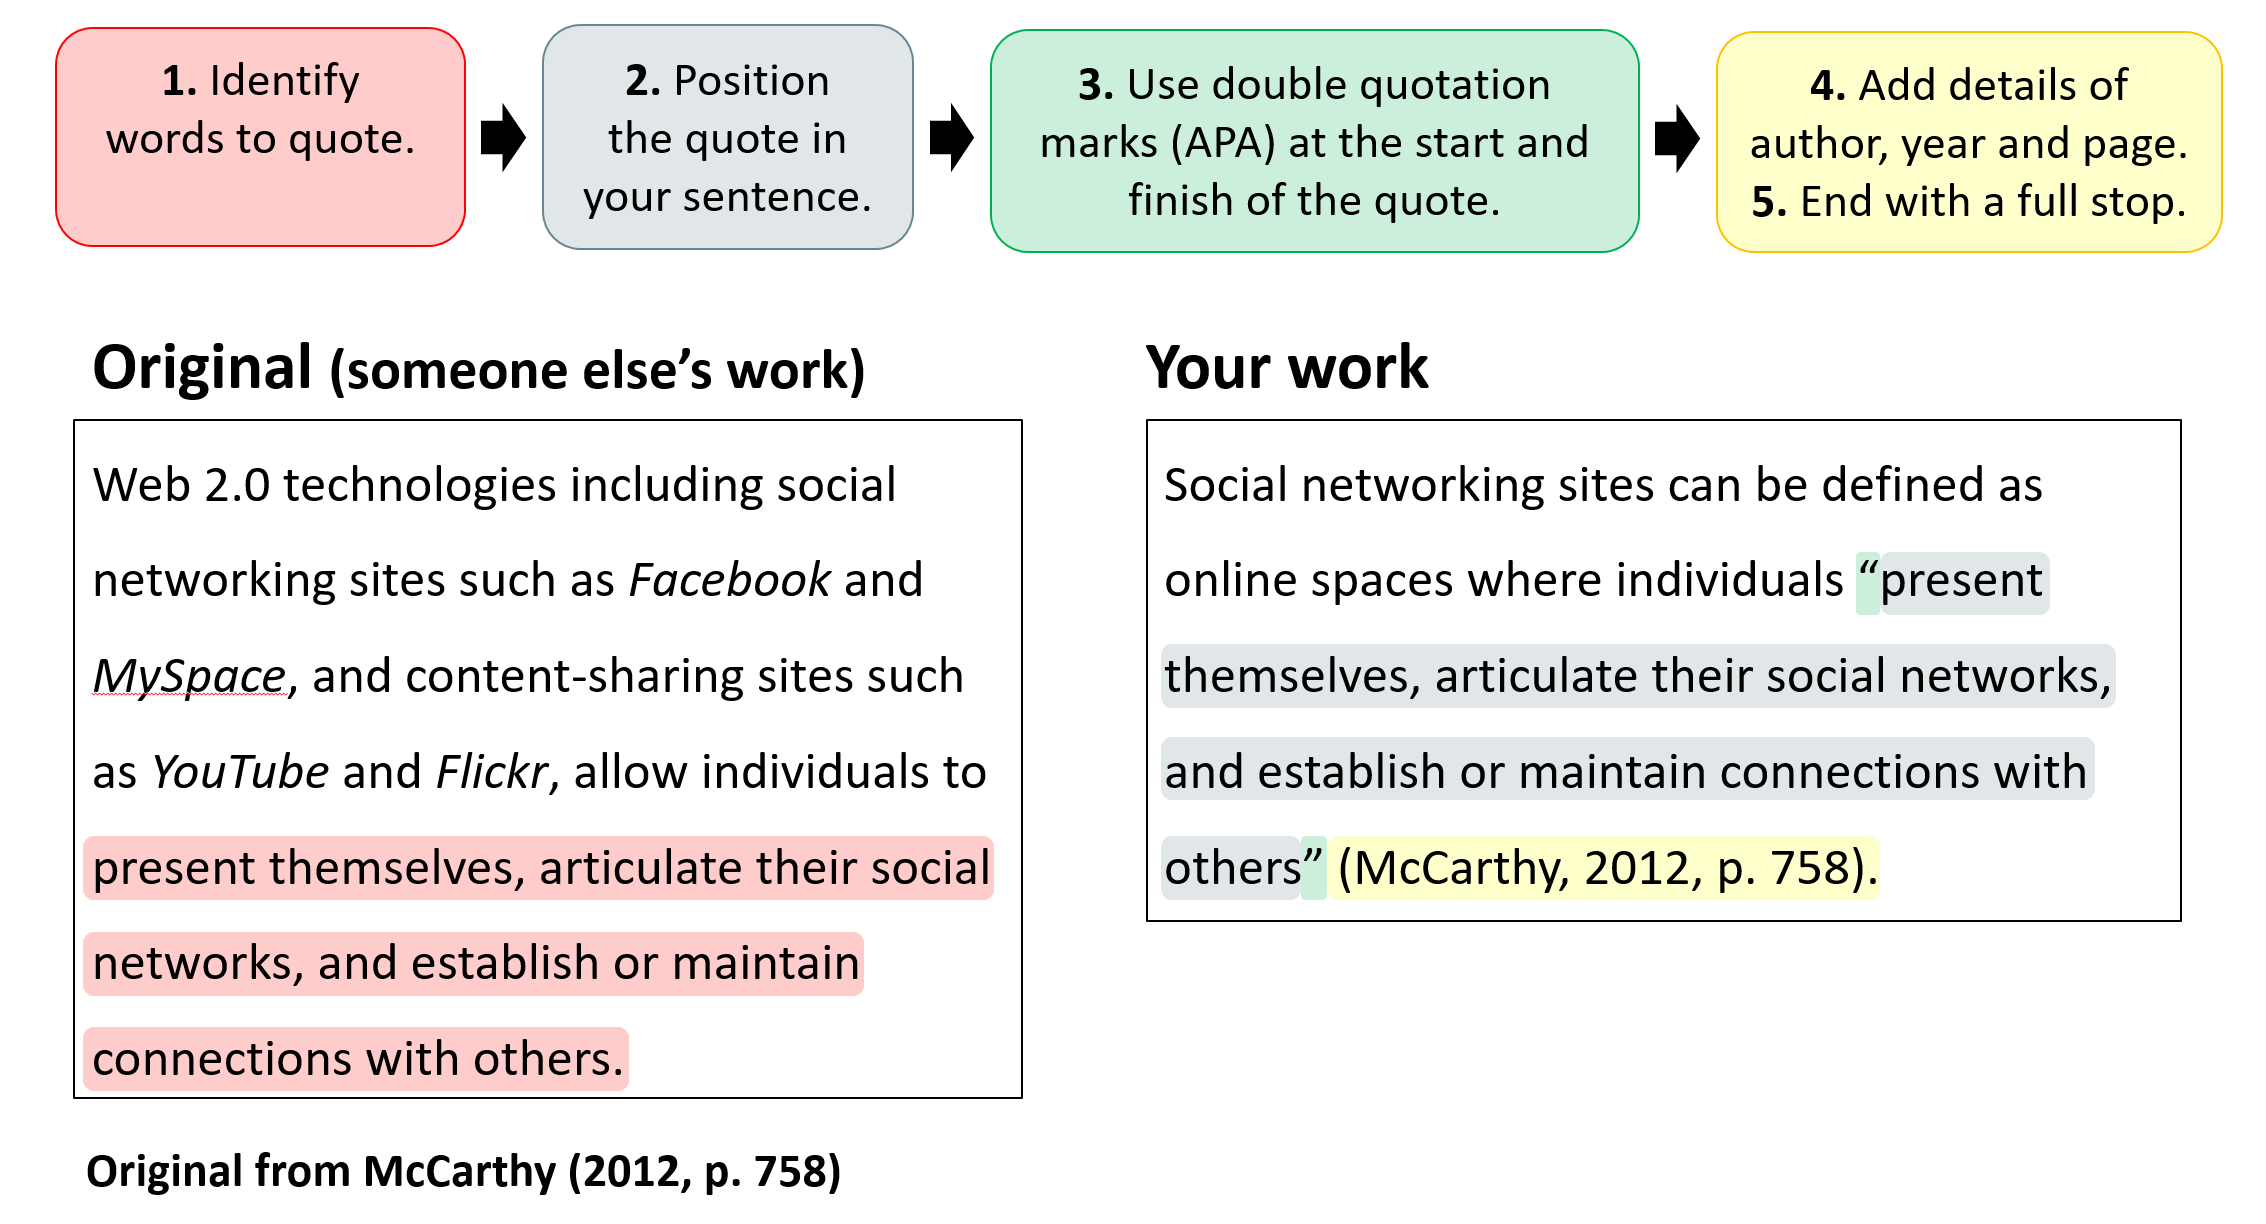 Text example with highlighting to illustrate features of a direct quote in your work in relation to the original work